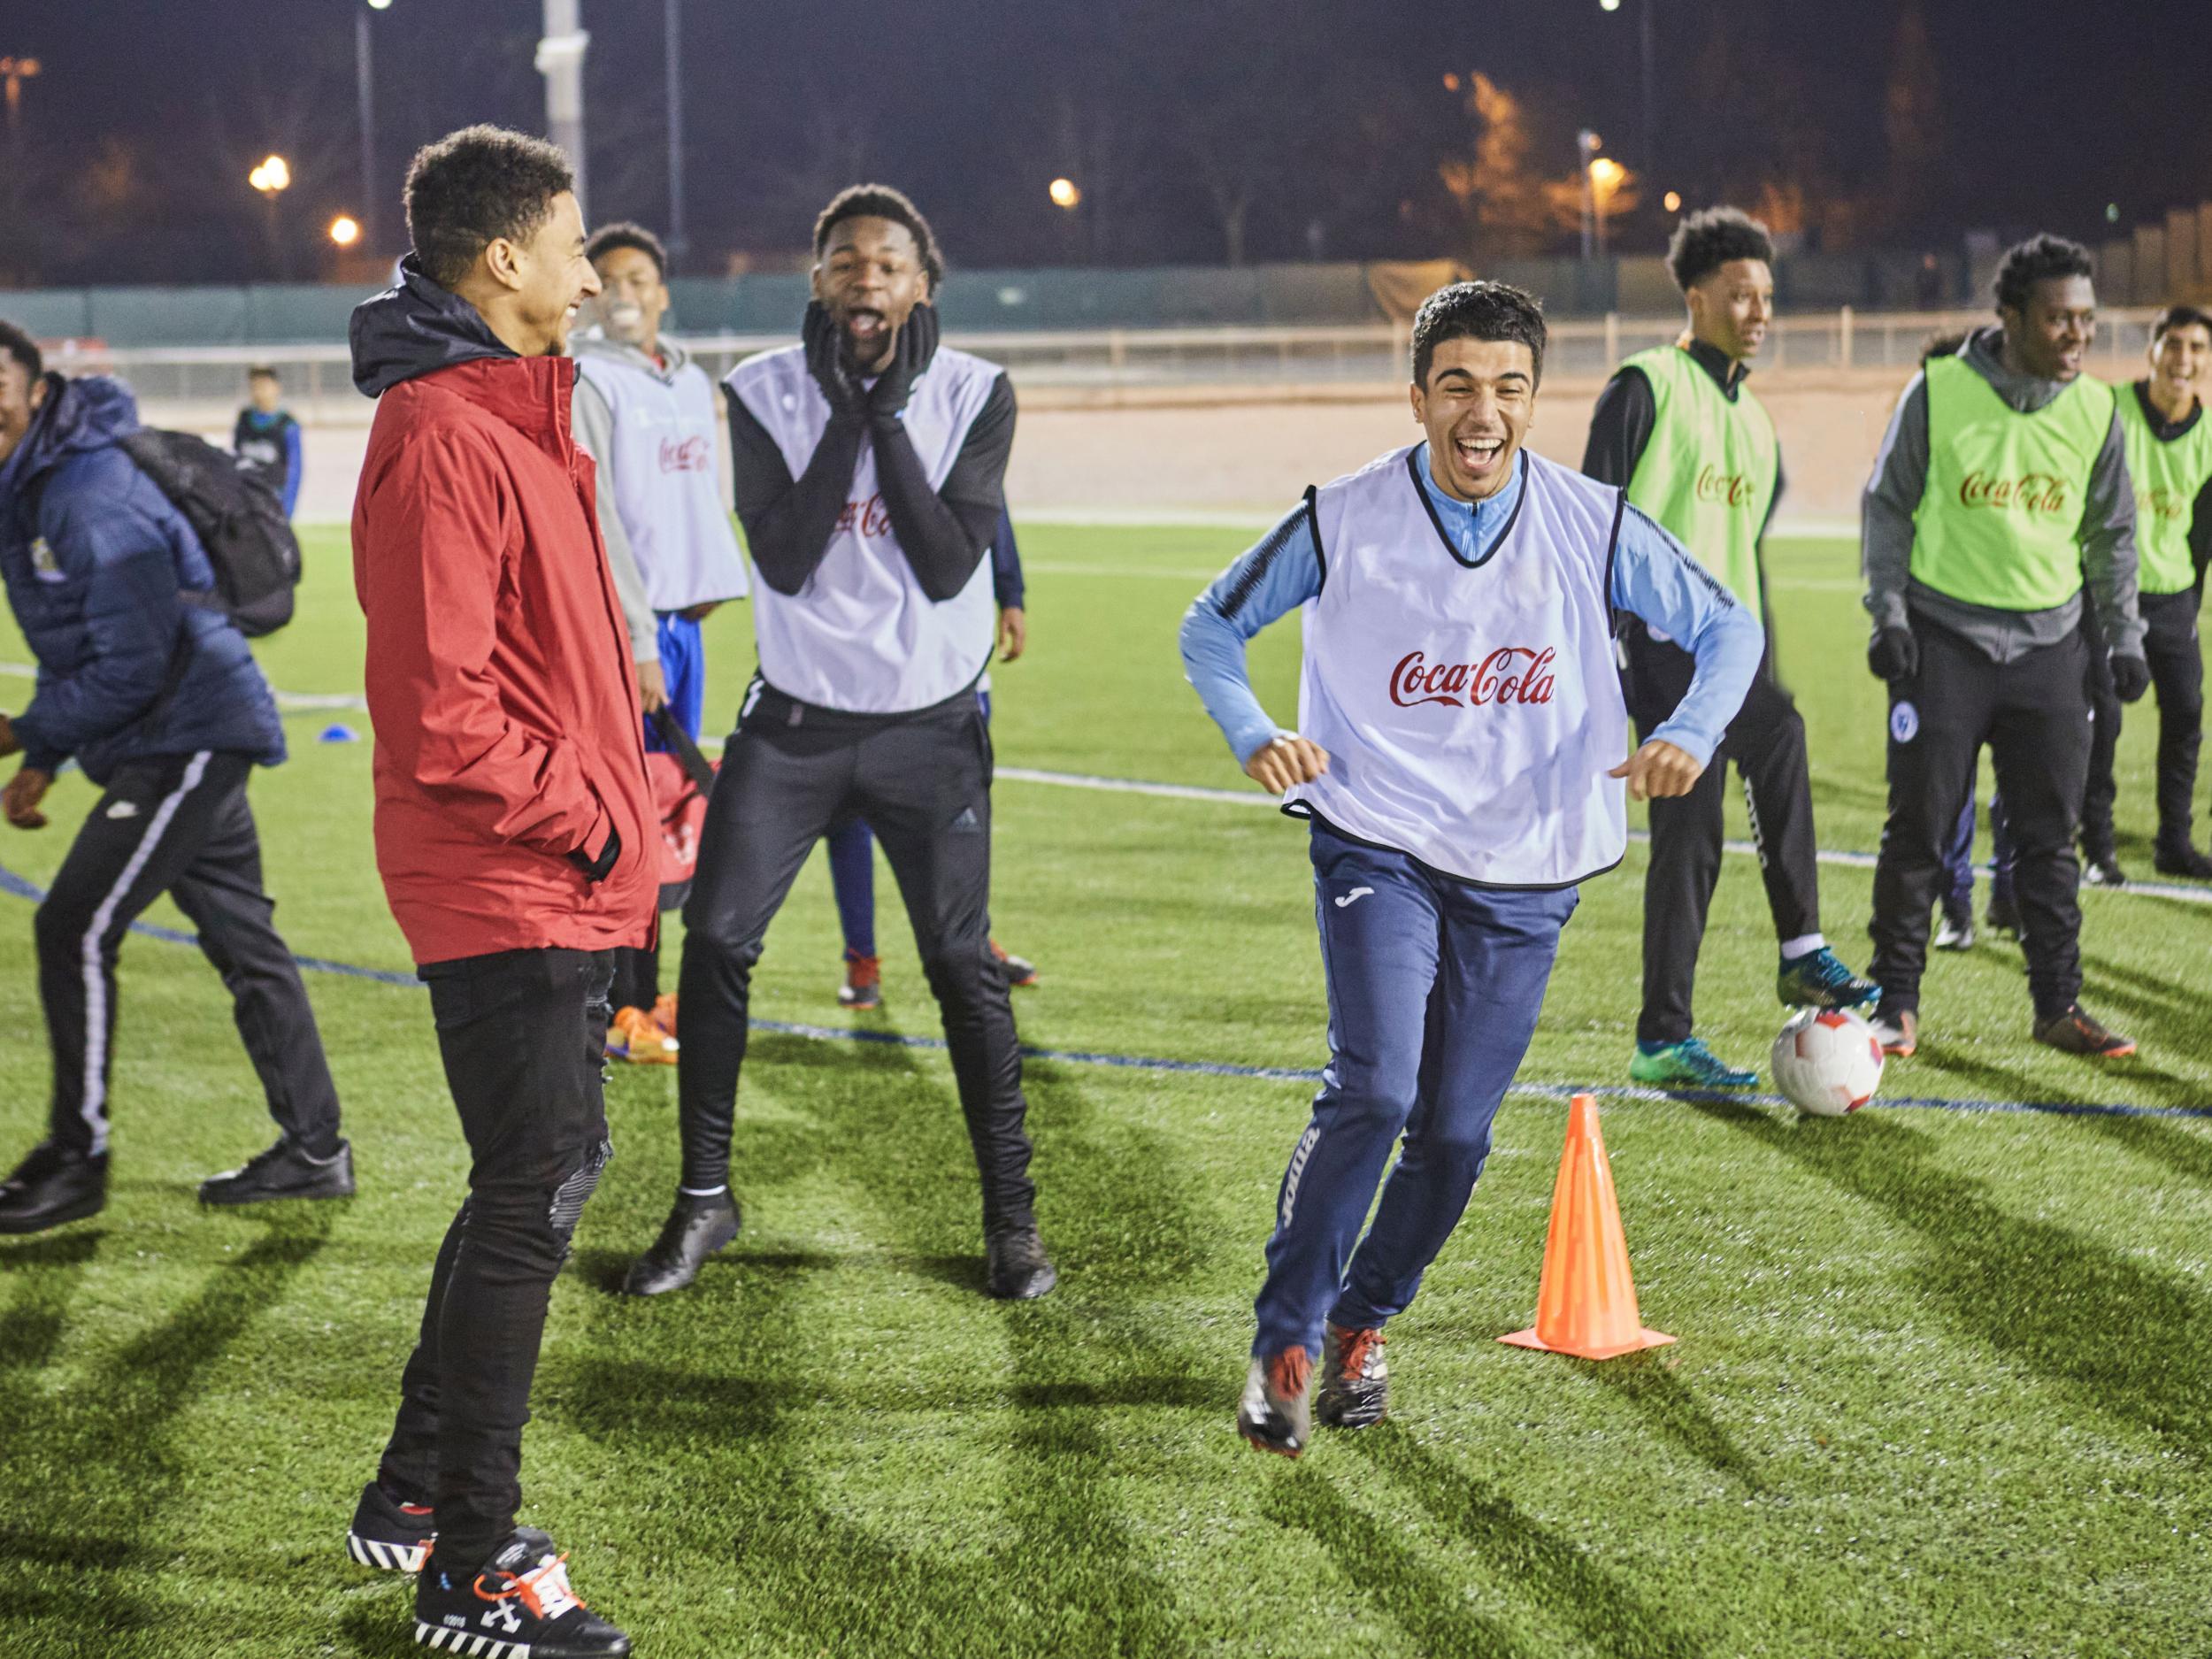 Jesse Lingard was speaking as part of the Coca-Cola #WhereEveryonePlays campaign